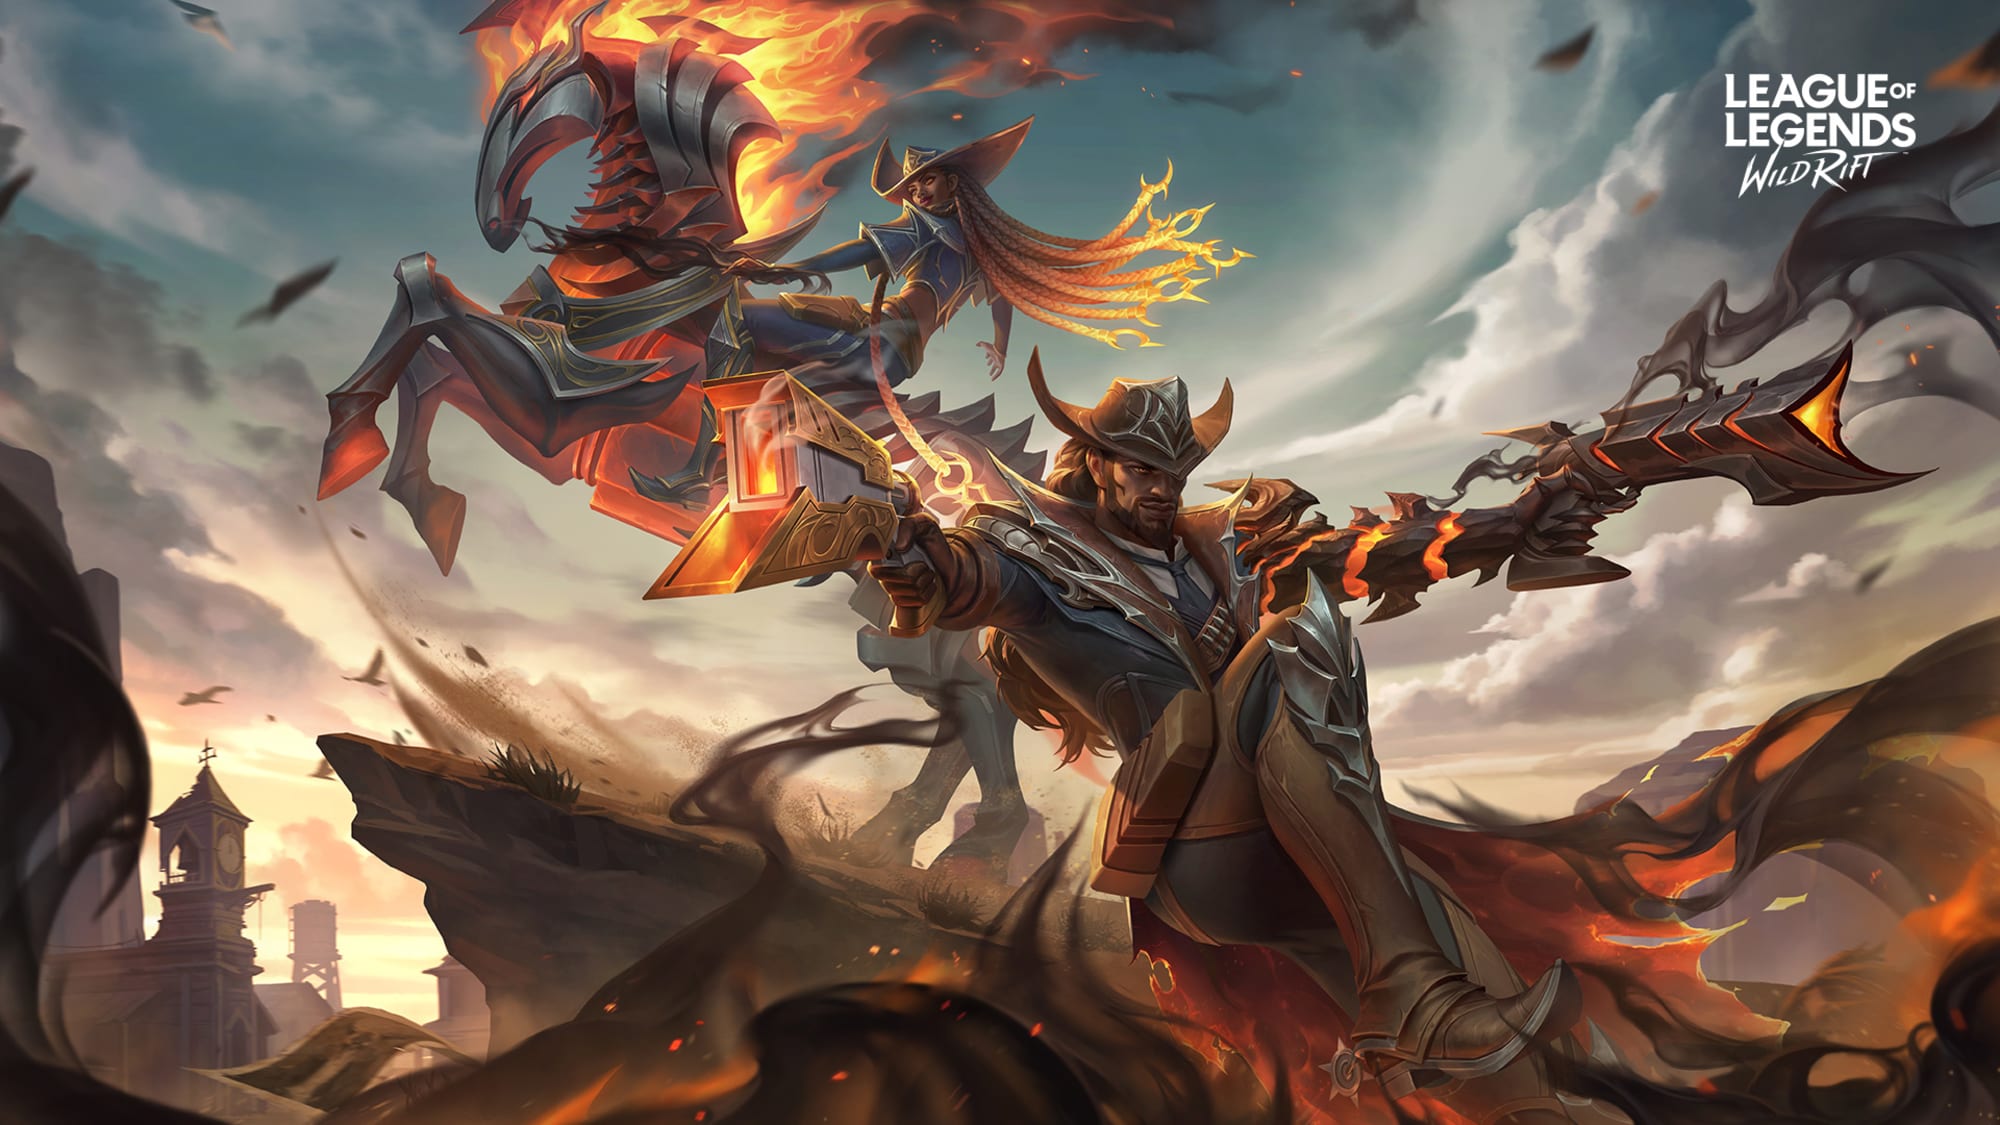 League of Legends: Wild Rift has amassed $500m in global revenue